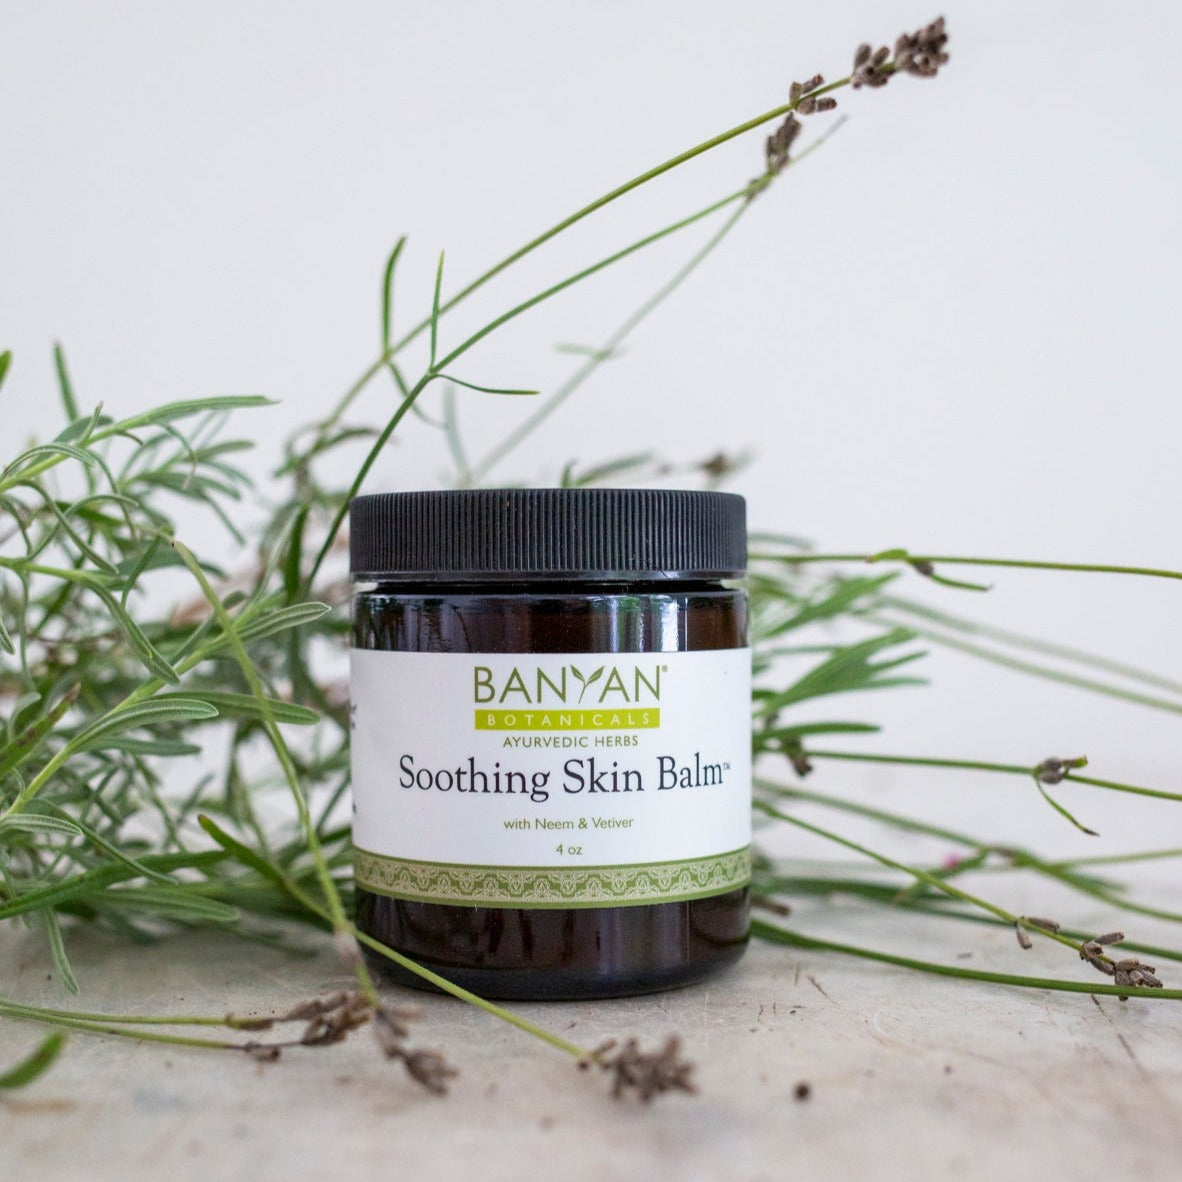 Banyan Botanicals Soothing Skin Balm with neem and vetiver